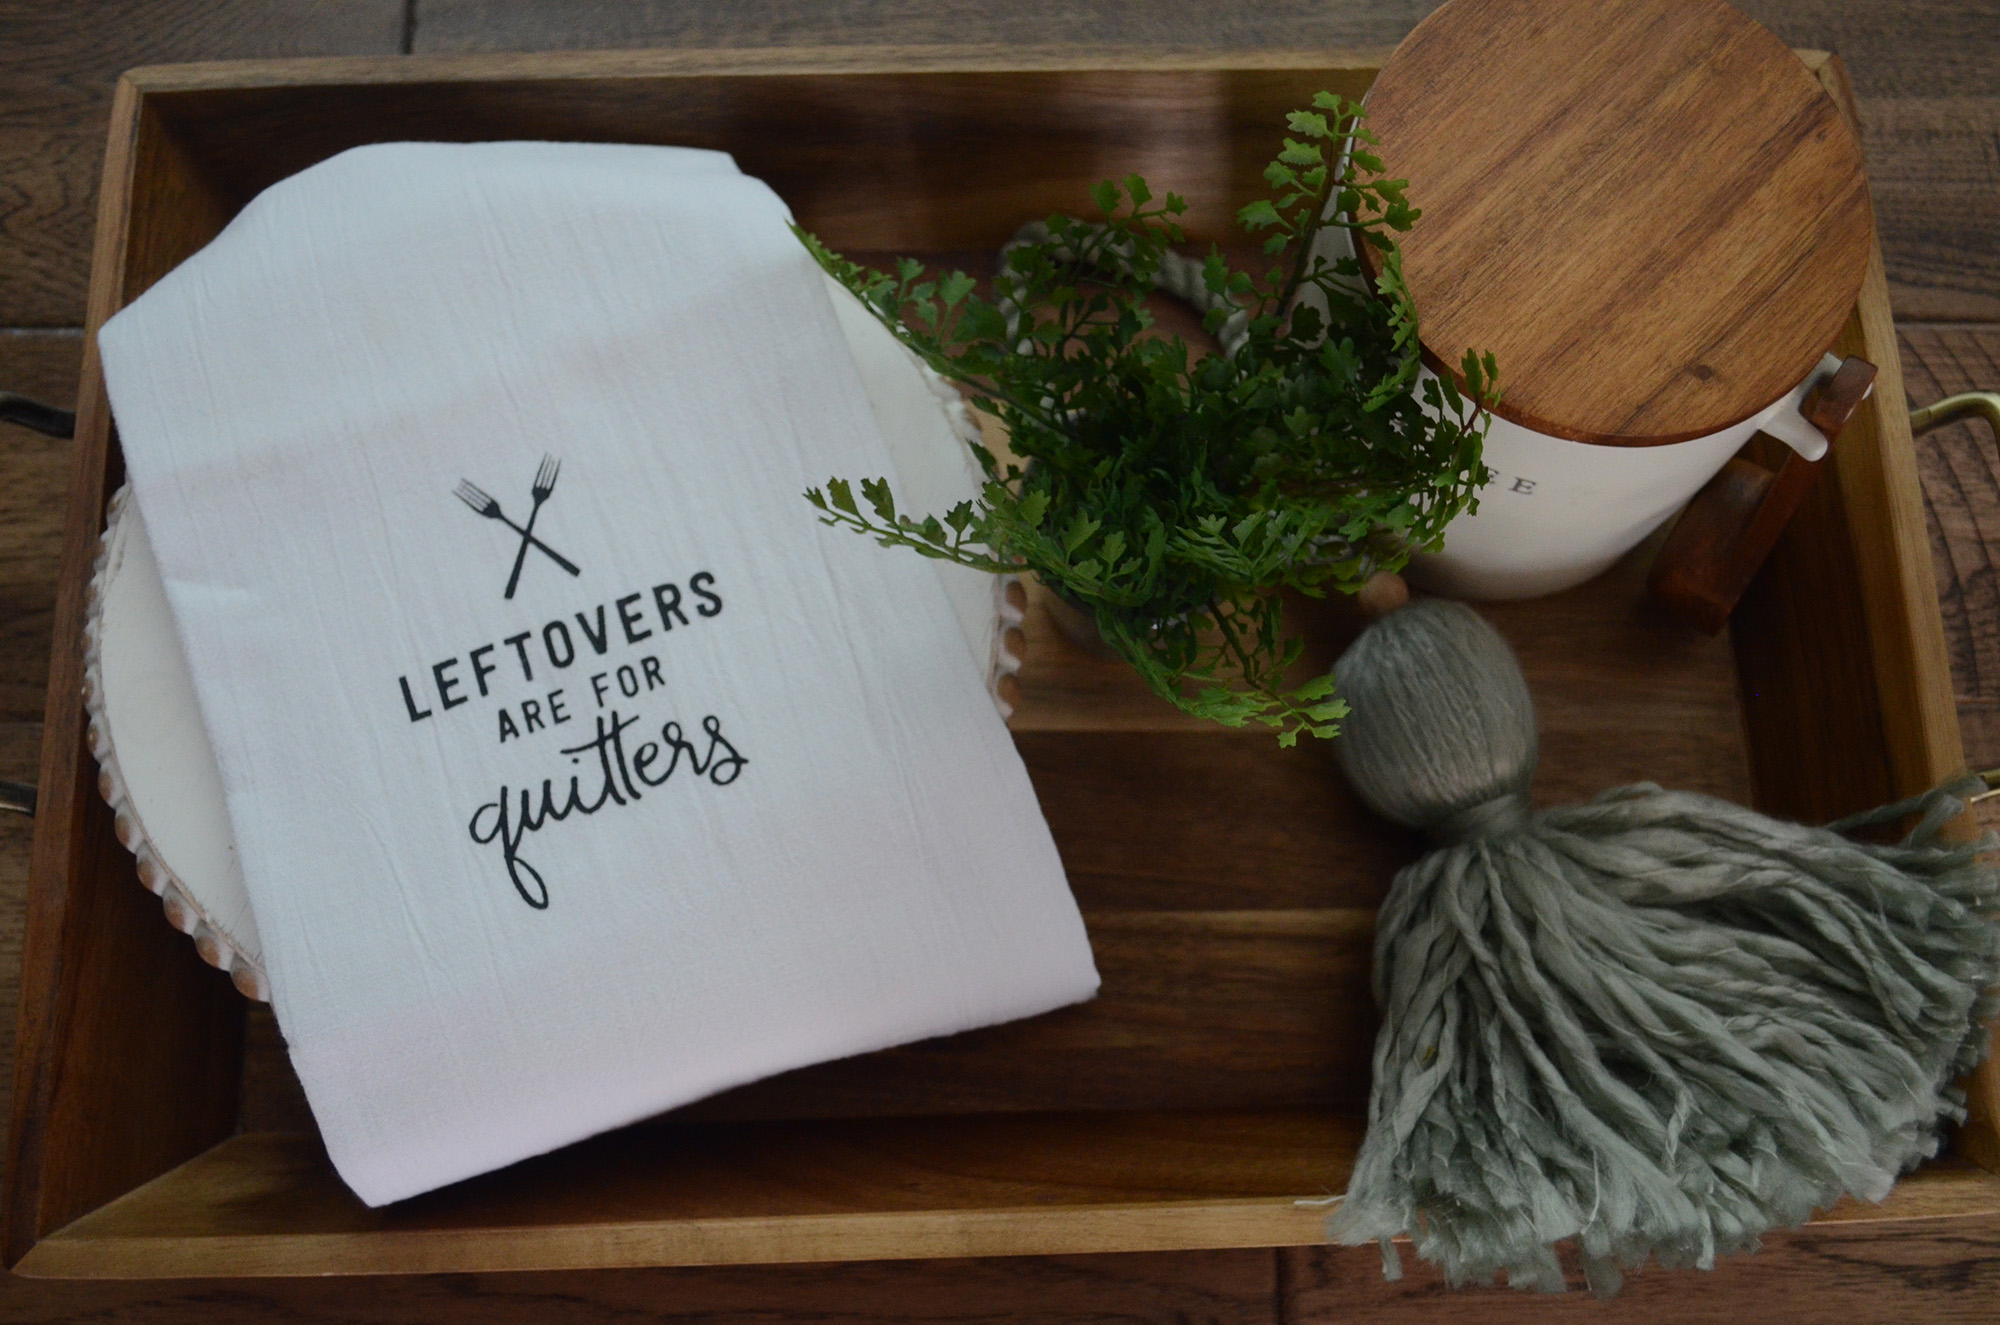 Leftovers Are For Quitters - Tea Towel